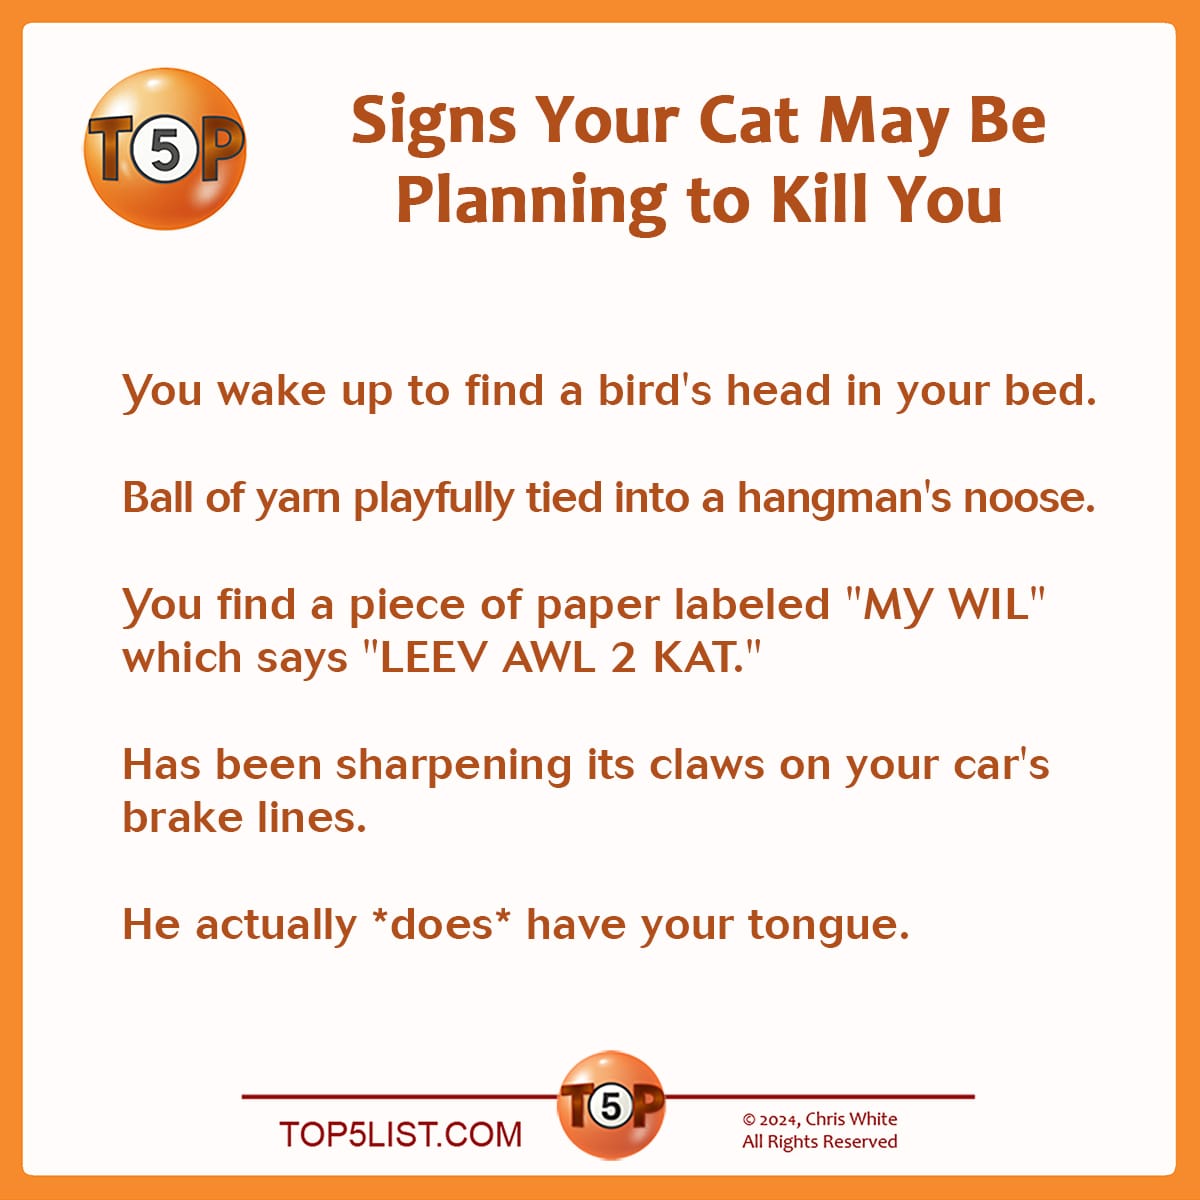 Signs Your Cat May Be Planning to Kill You   |  You wake up to find a bird's head in your bed.  Ball of yarn playfully tied into a hangman's noose.  You find a piece of paper labeled "MY WIL" which says "LEEV AWL 2 KAT."  Has been sharpening its claws on your car's brake lines.  He actually *does* have your tongue.   Originally published on May 31, 1996. Selected from 91 submissions by 27 contributors. Writer credits:  5> Patrick Kachurek, Ann Arbor, MI 4> Spike Jones, Atlanta, GA 4> Galen Komatsu, Hawaii 3> Perry Friedman, Menlo Park, CA 2> Kermit Woodall, Richmond, VA 1> Marshal Perlman, Minneapolis, MN